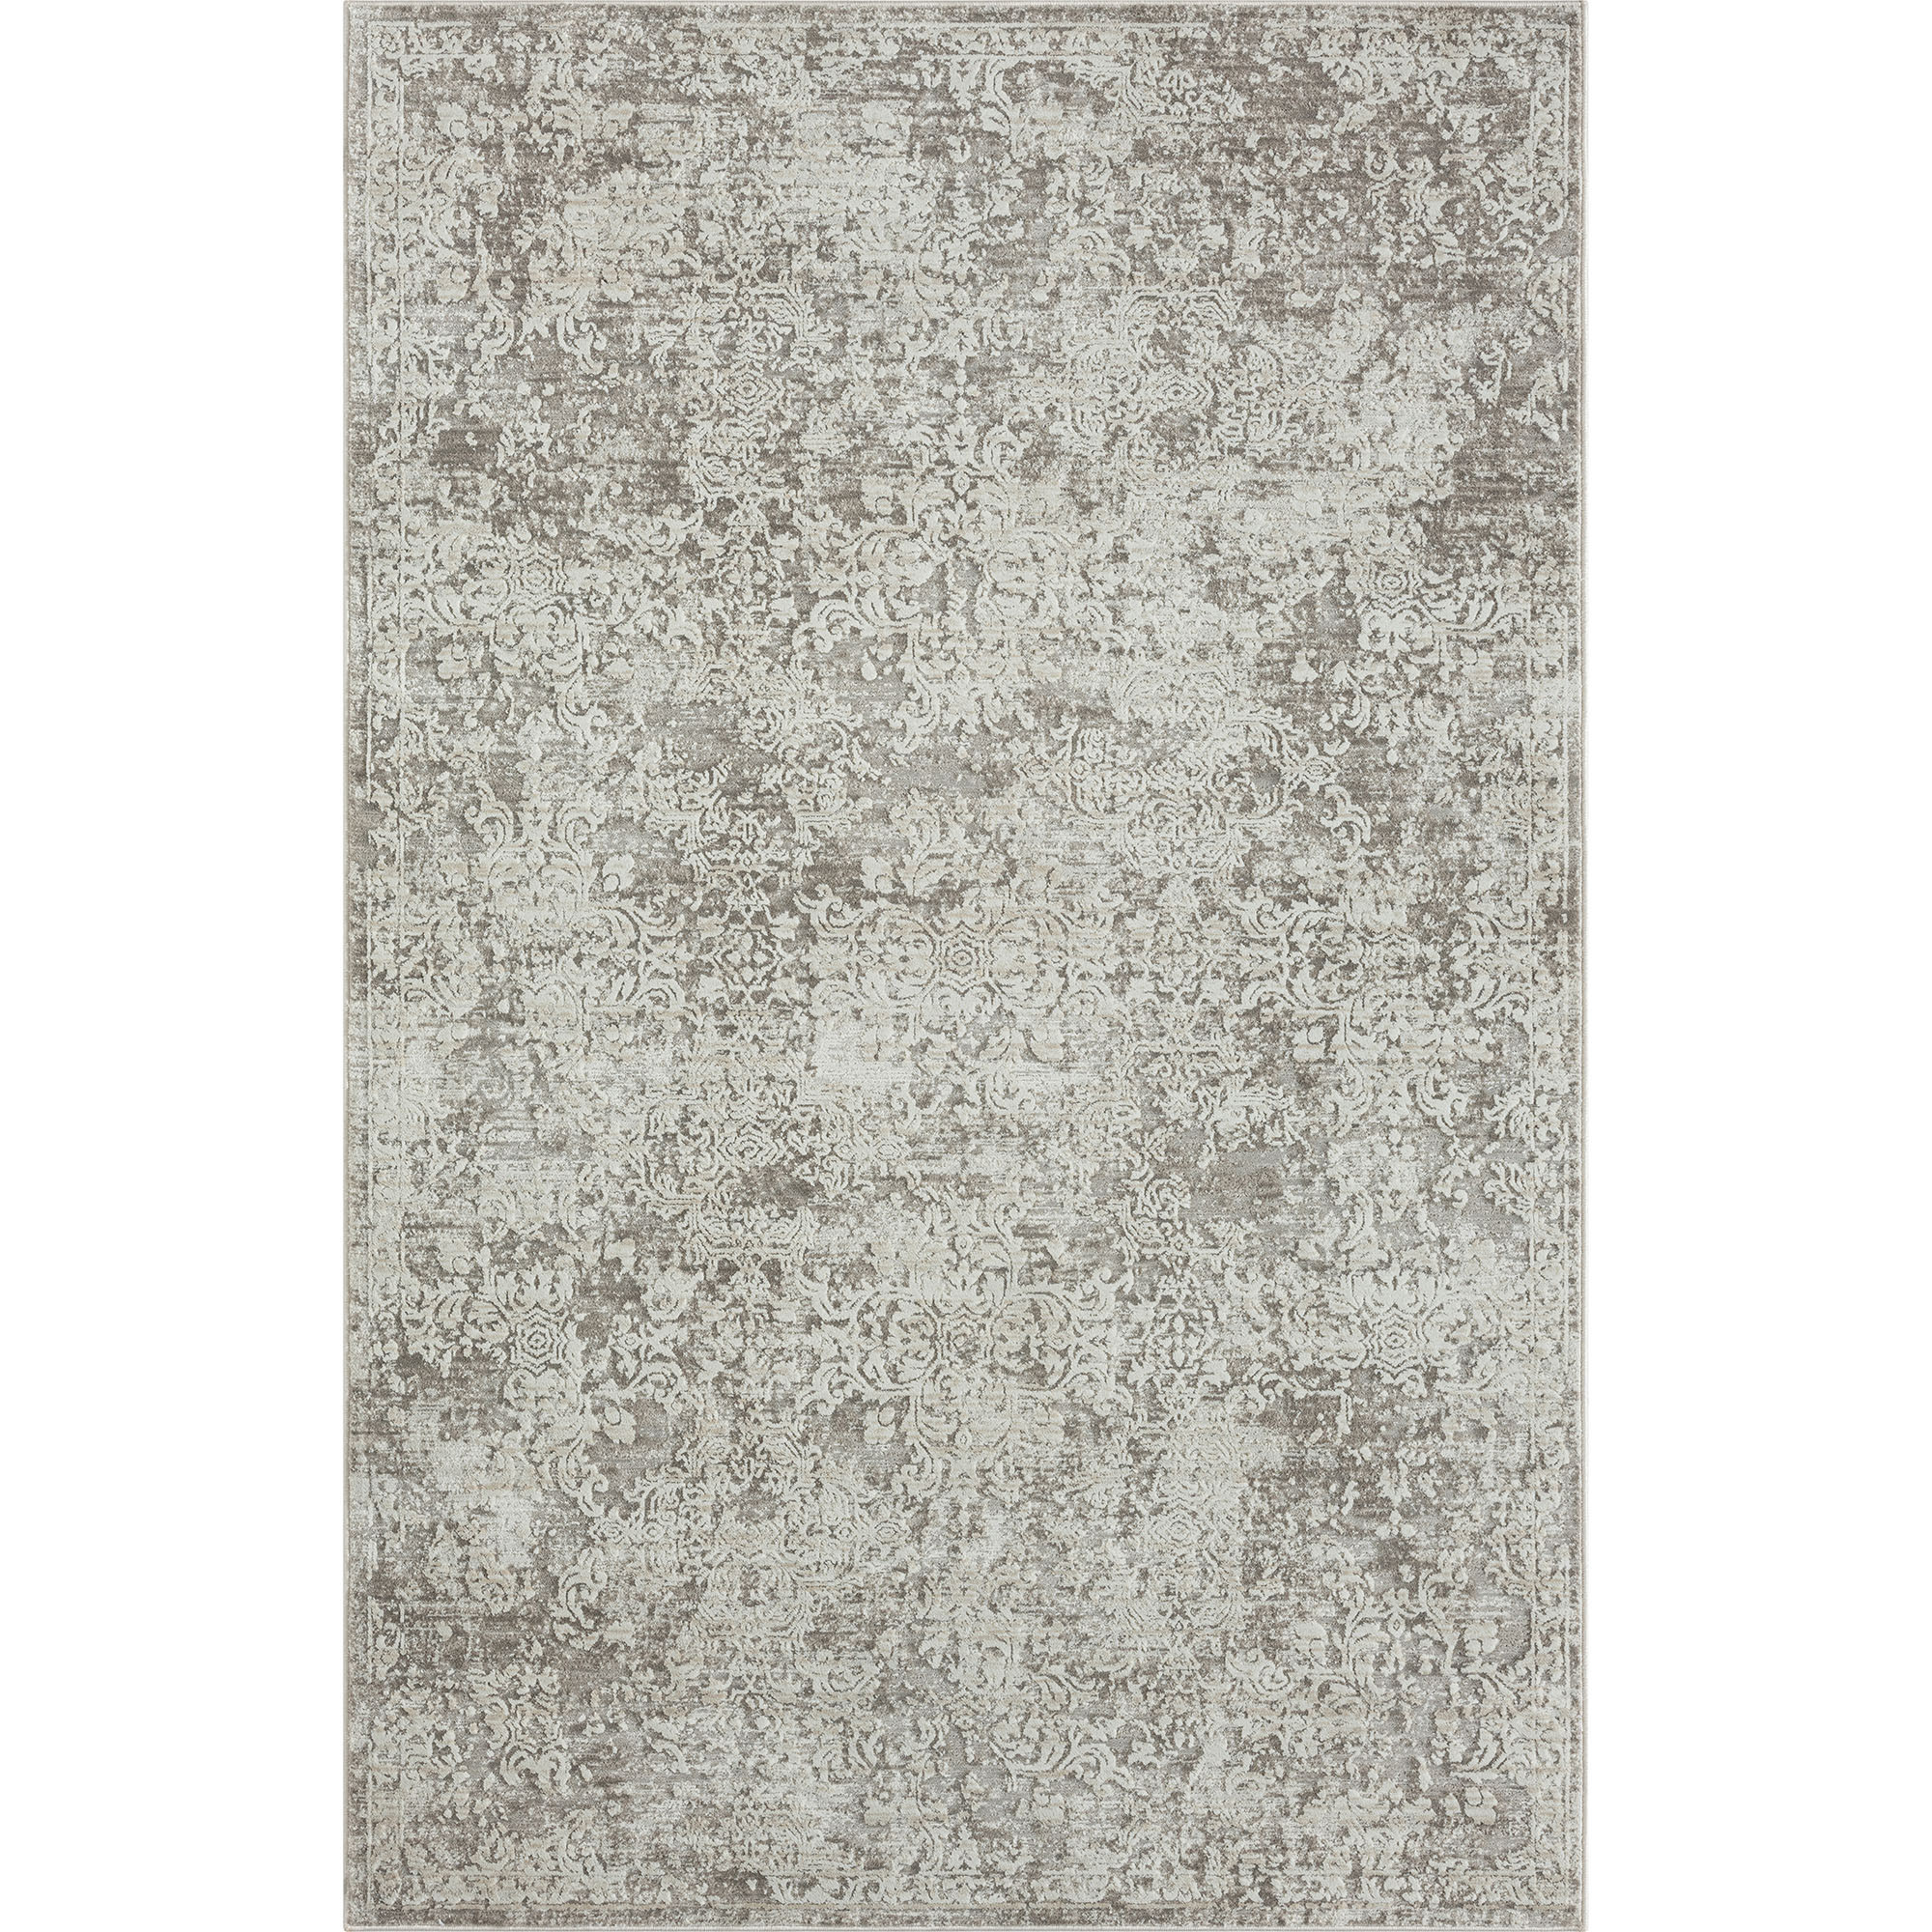 5' X 8' Gray Abstract Distressed Area Rug-515955-1